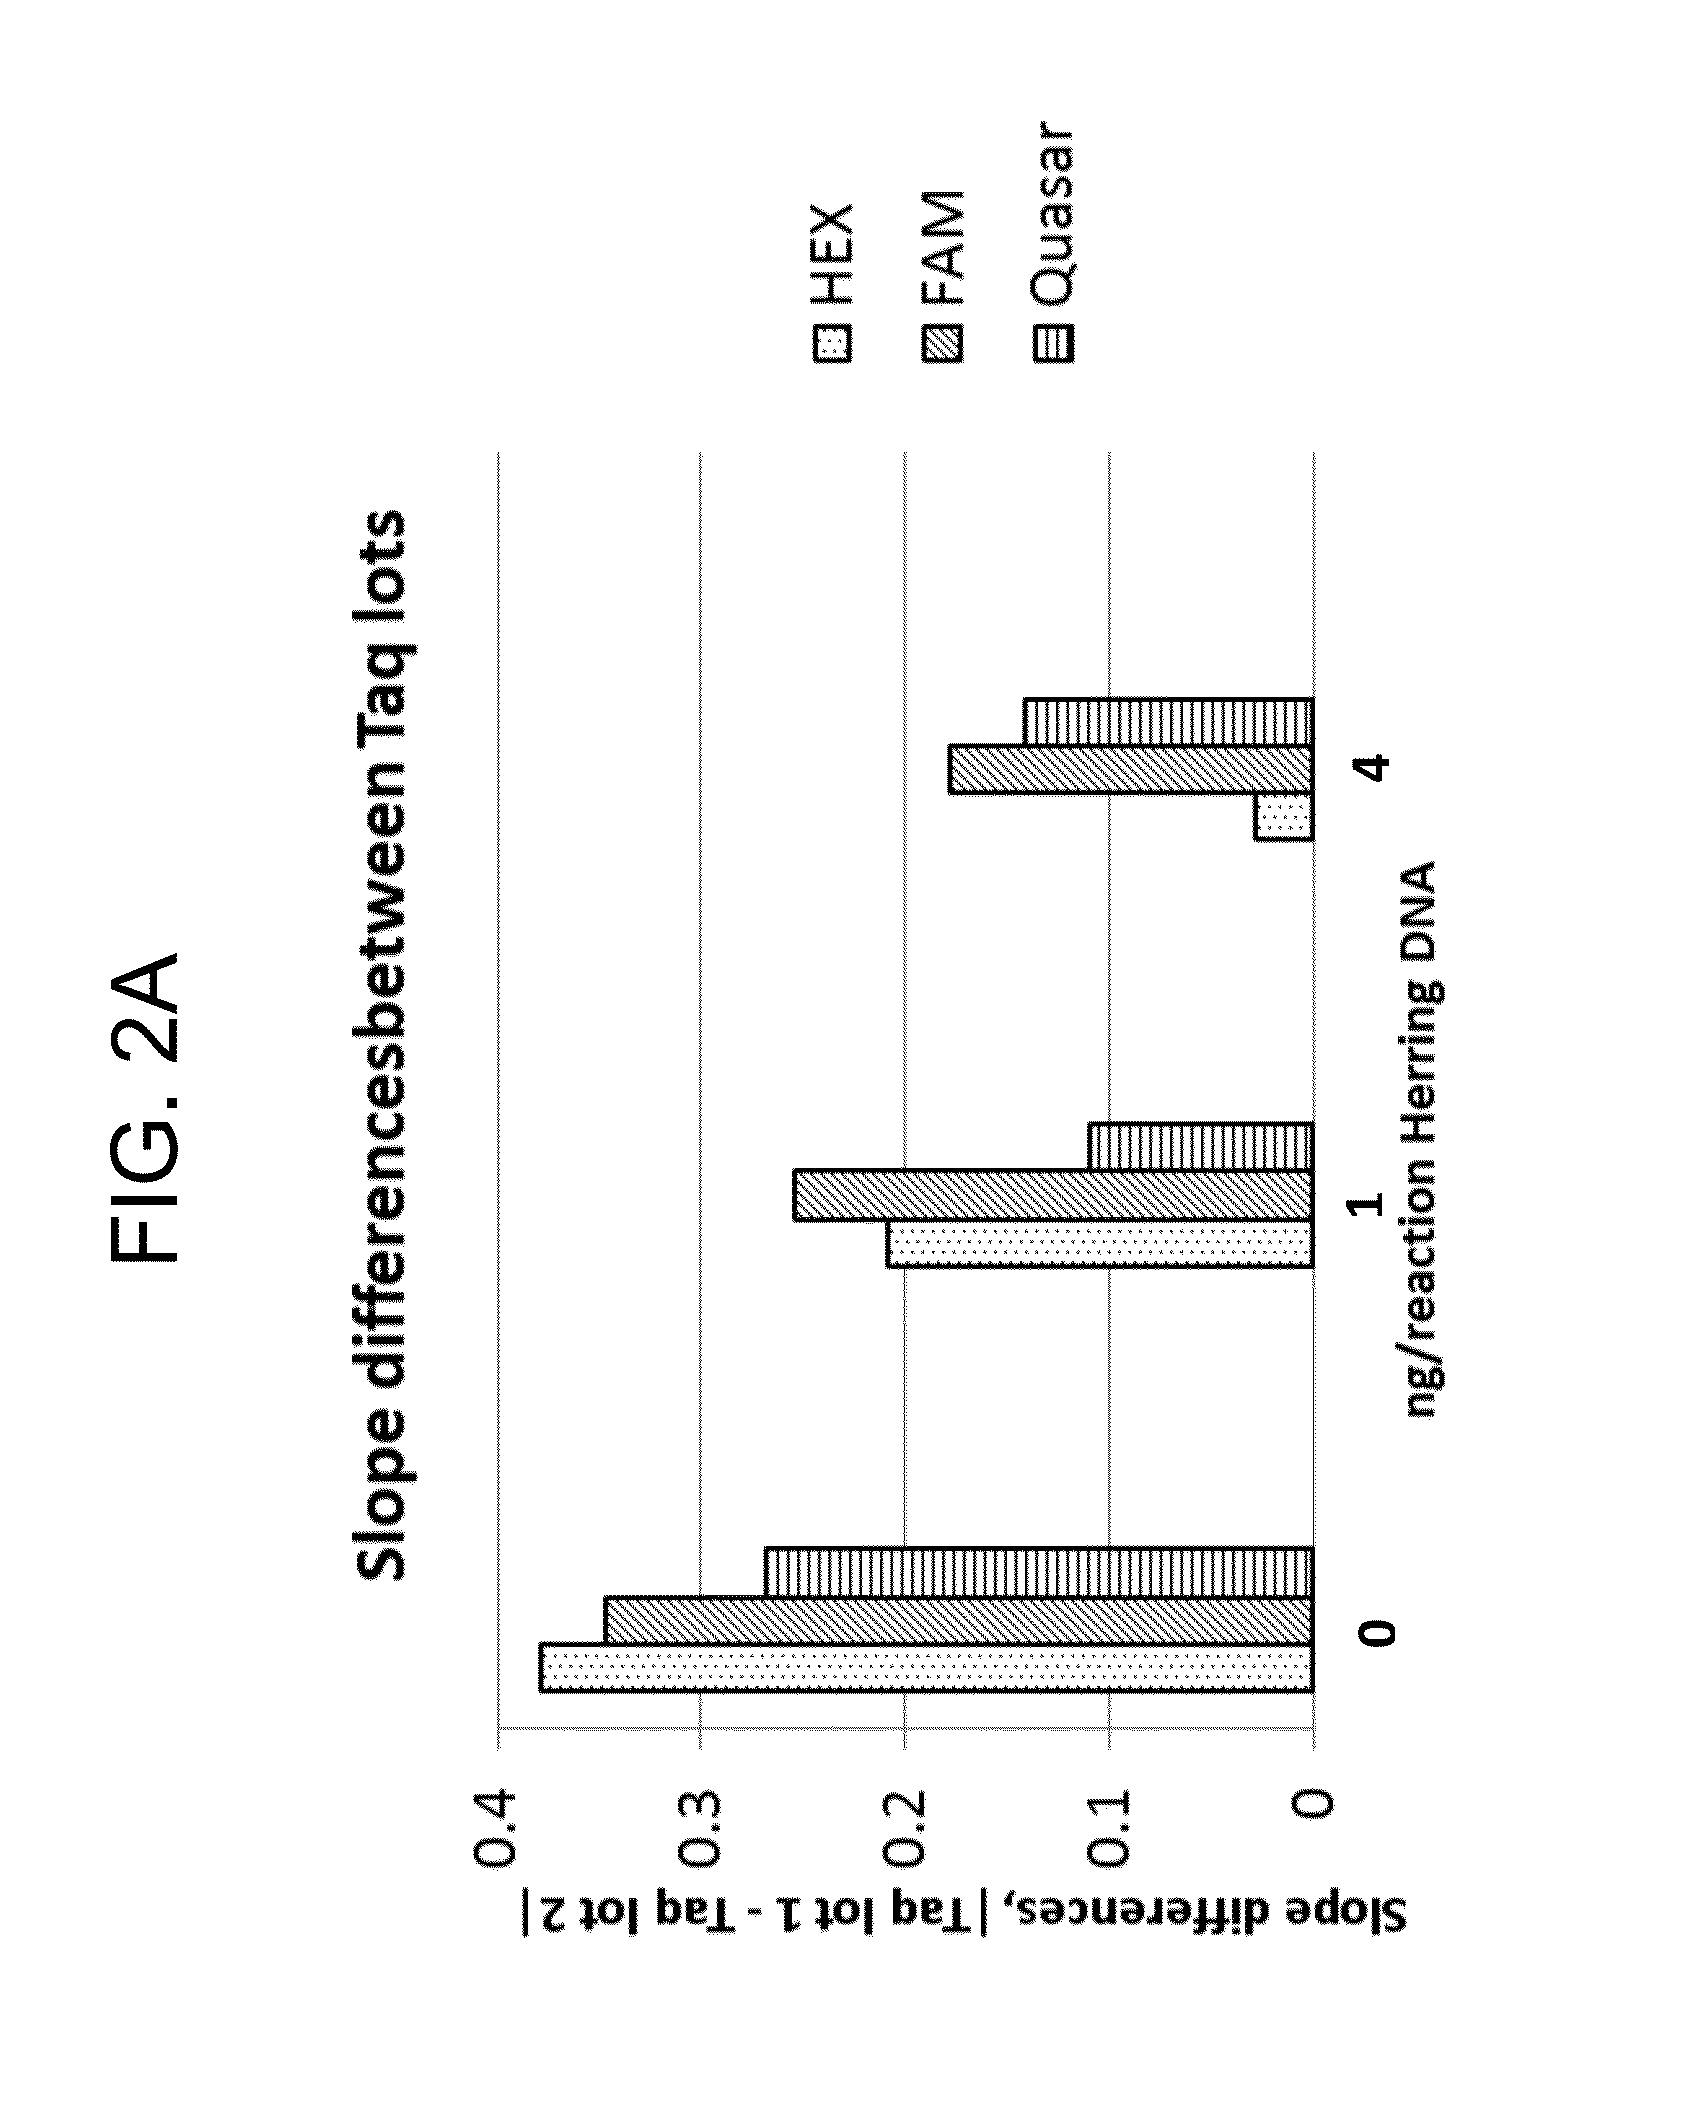 Normalization of polymerase activity